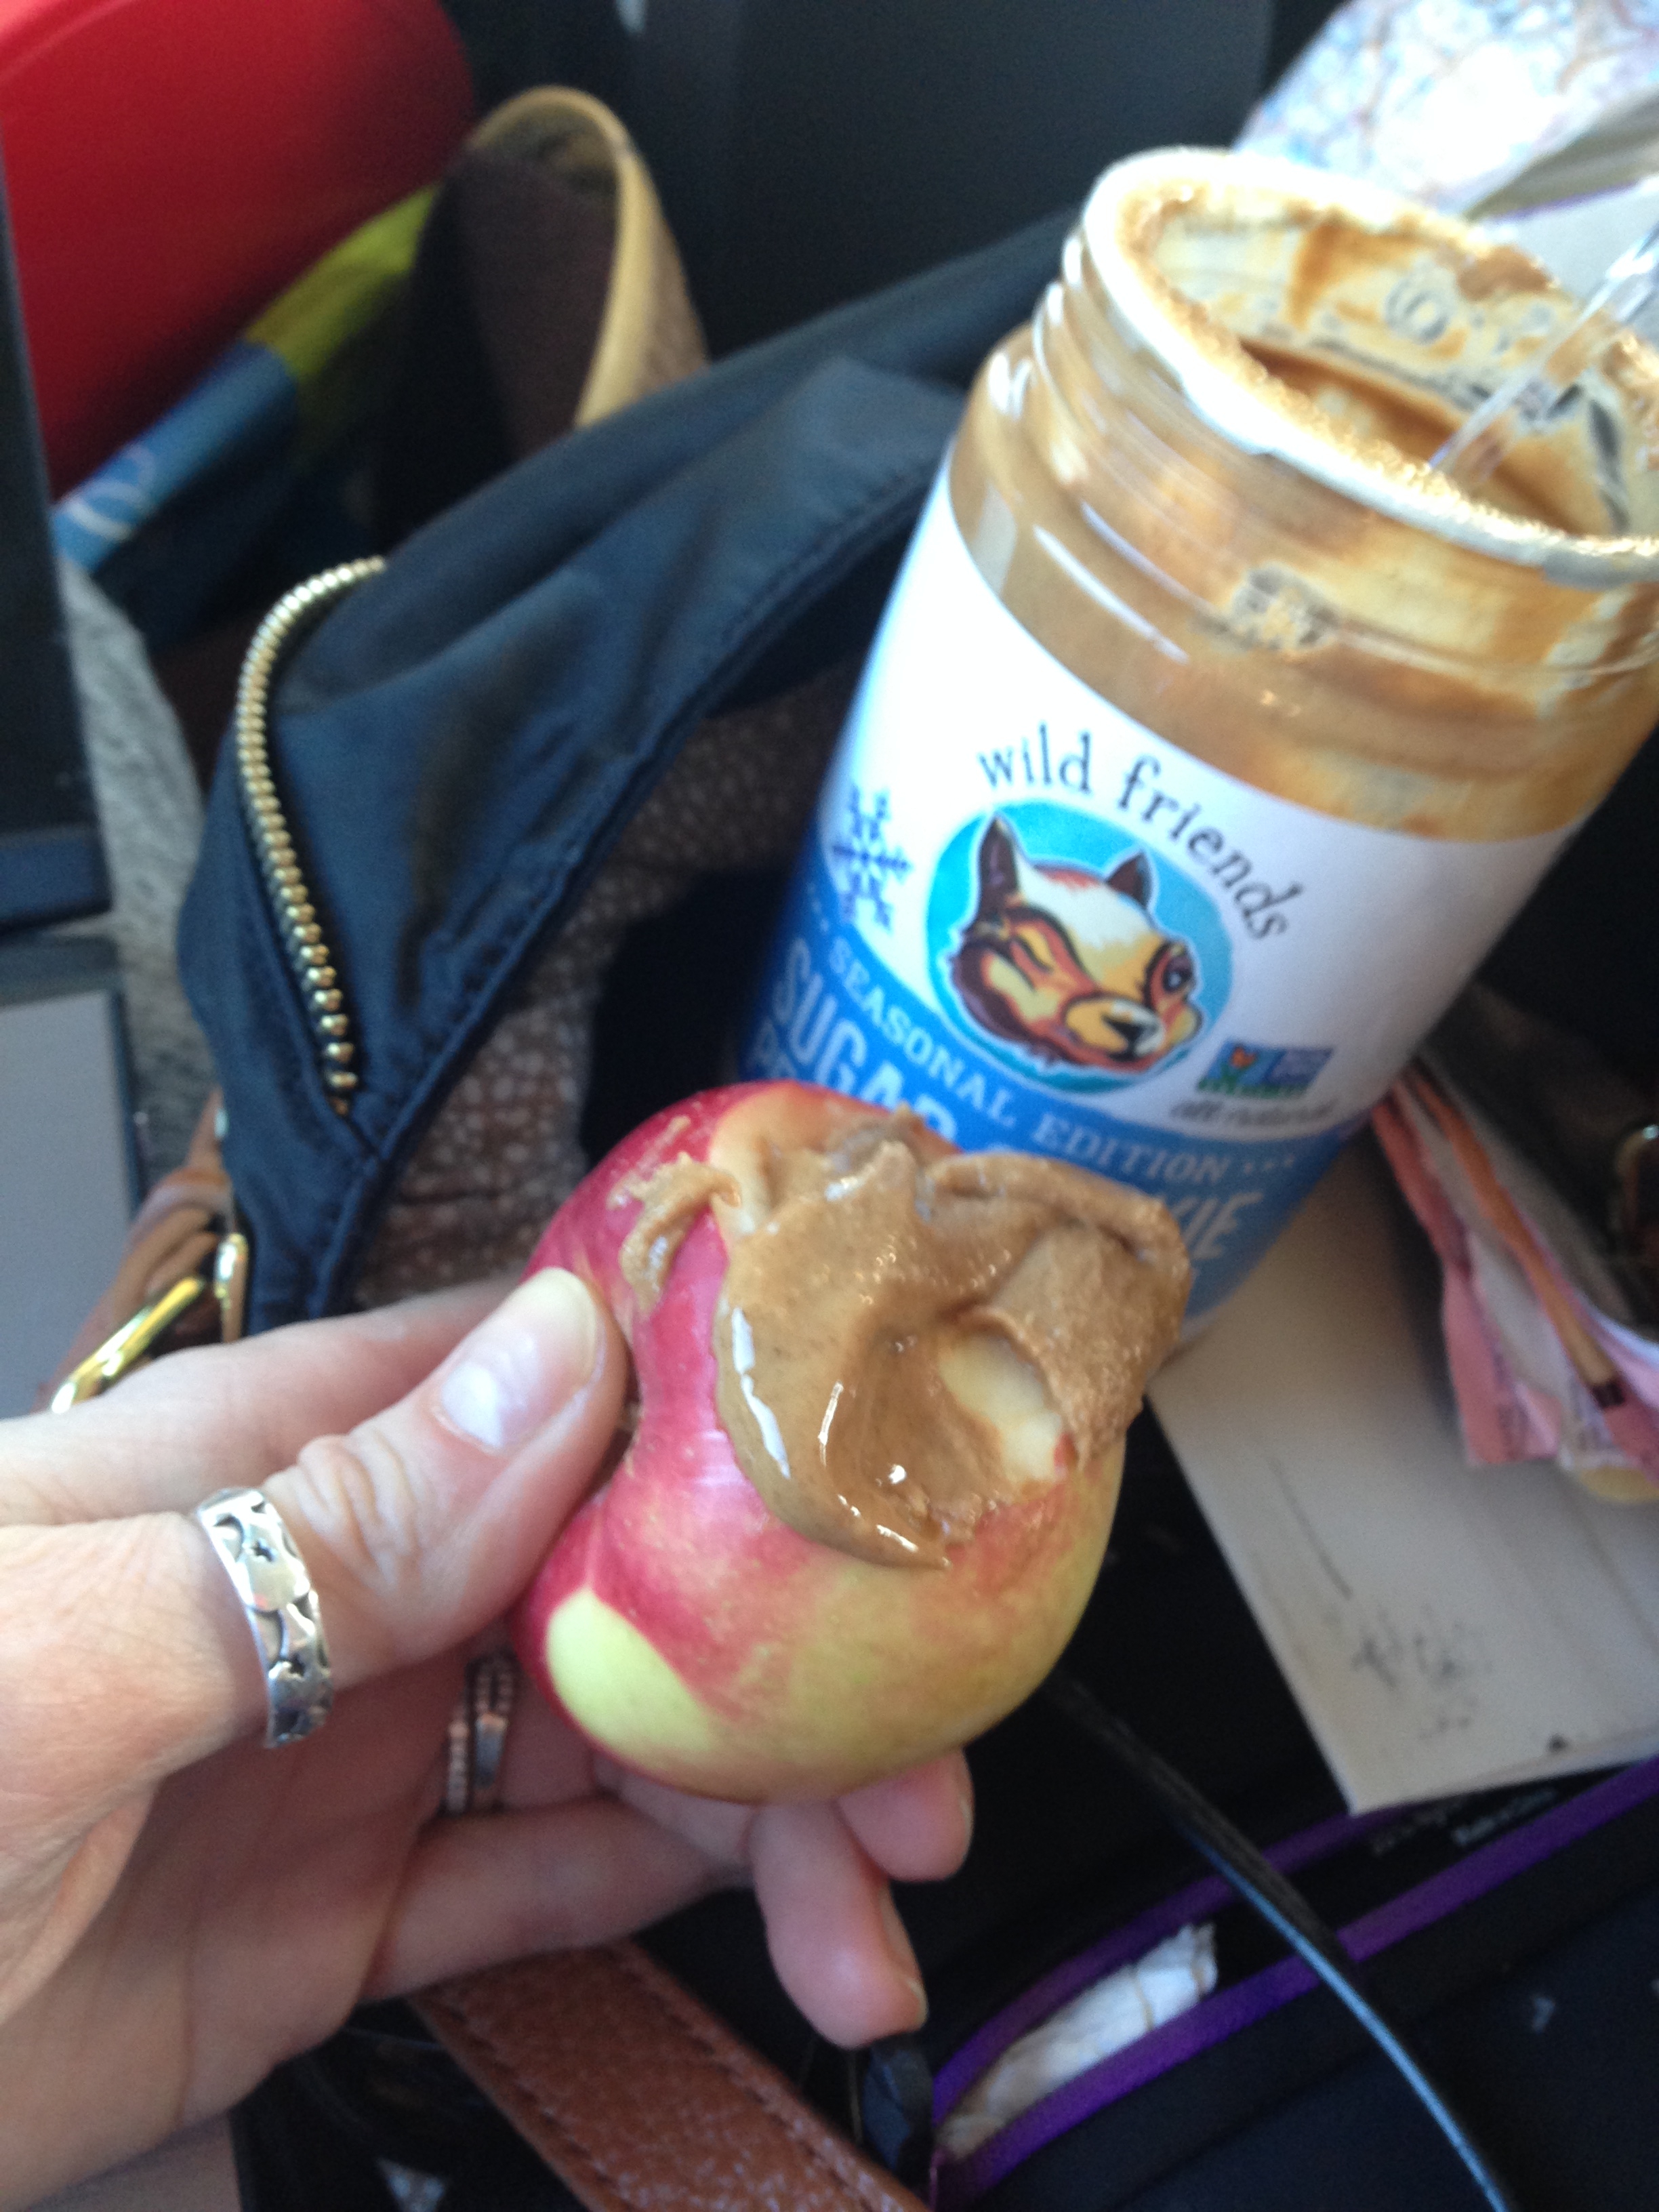 apple with wild friends peanut butter